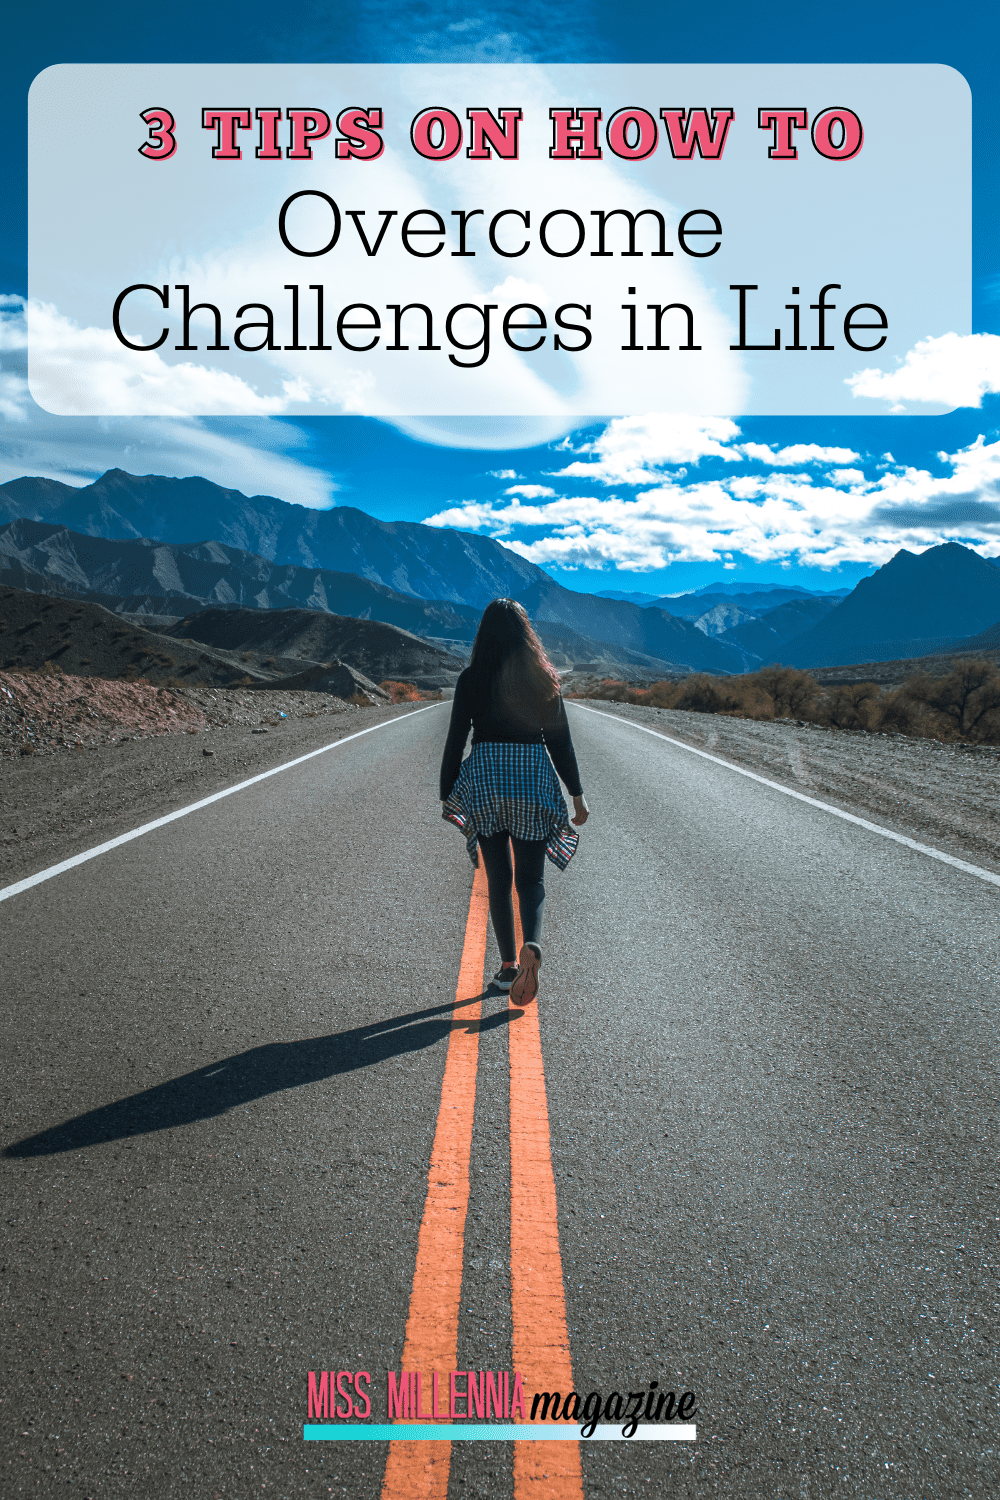 3 Tips on How to Overcome Challenges in Life